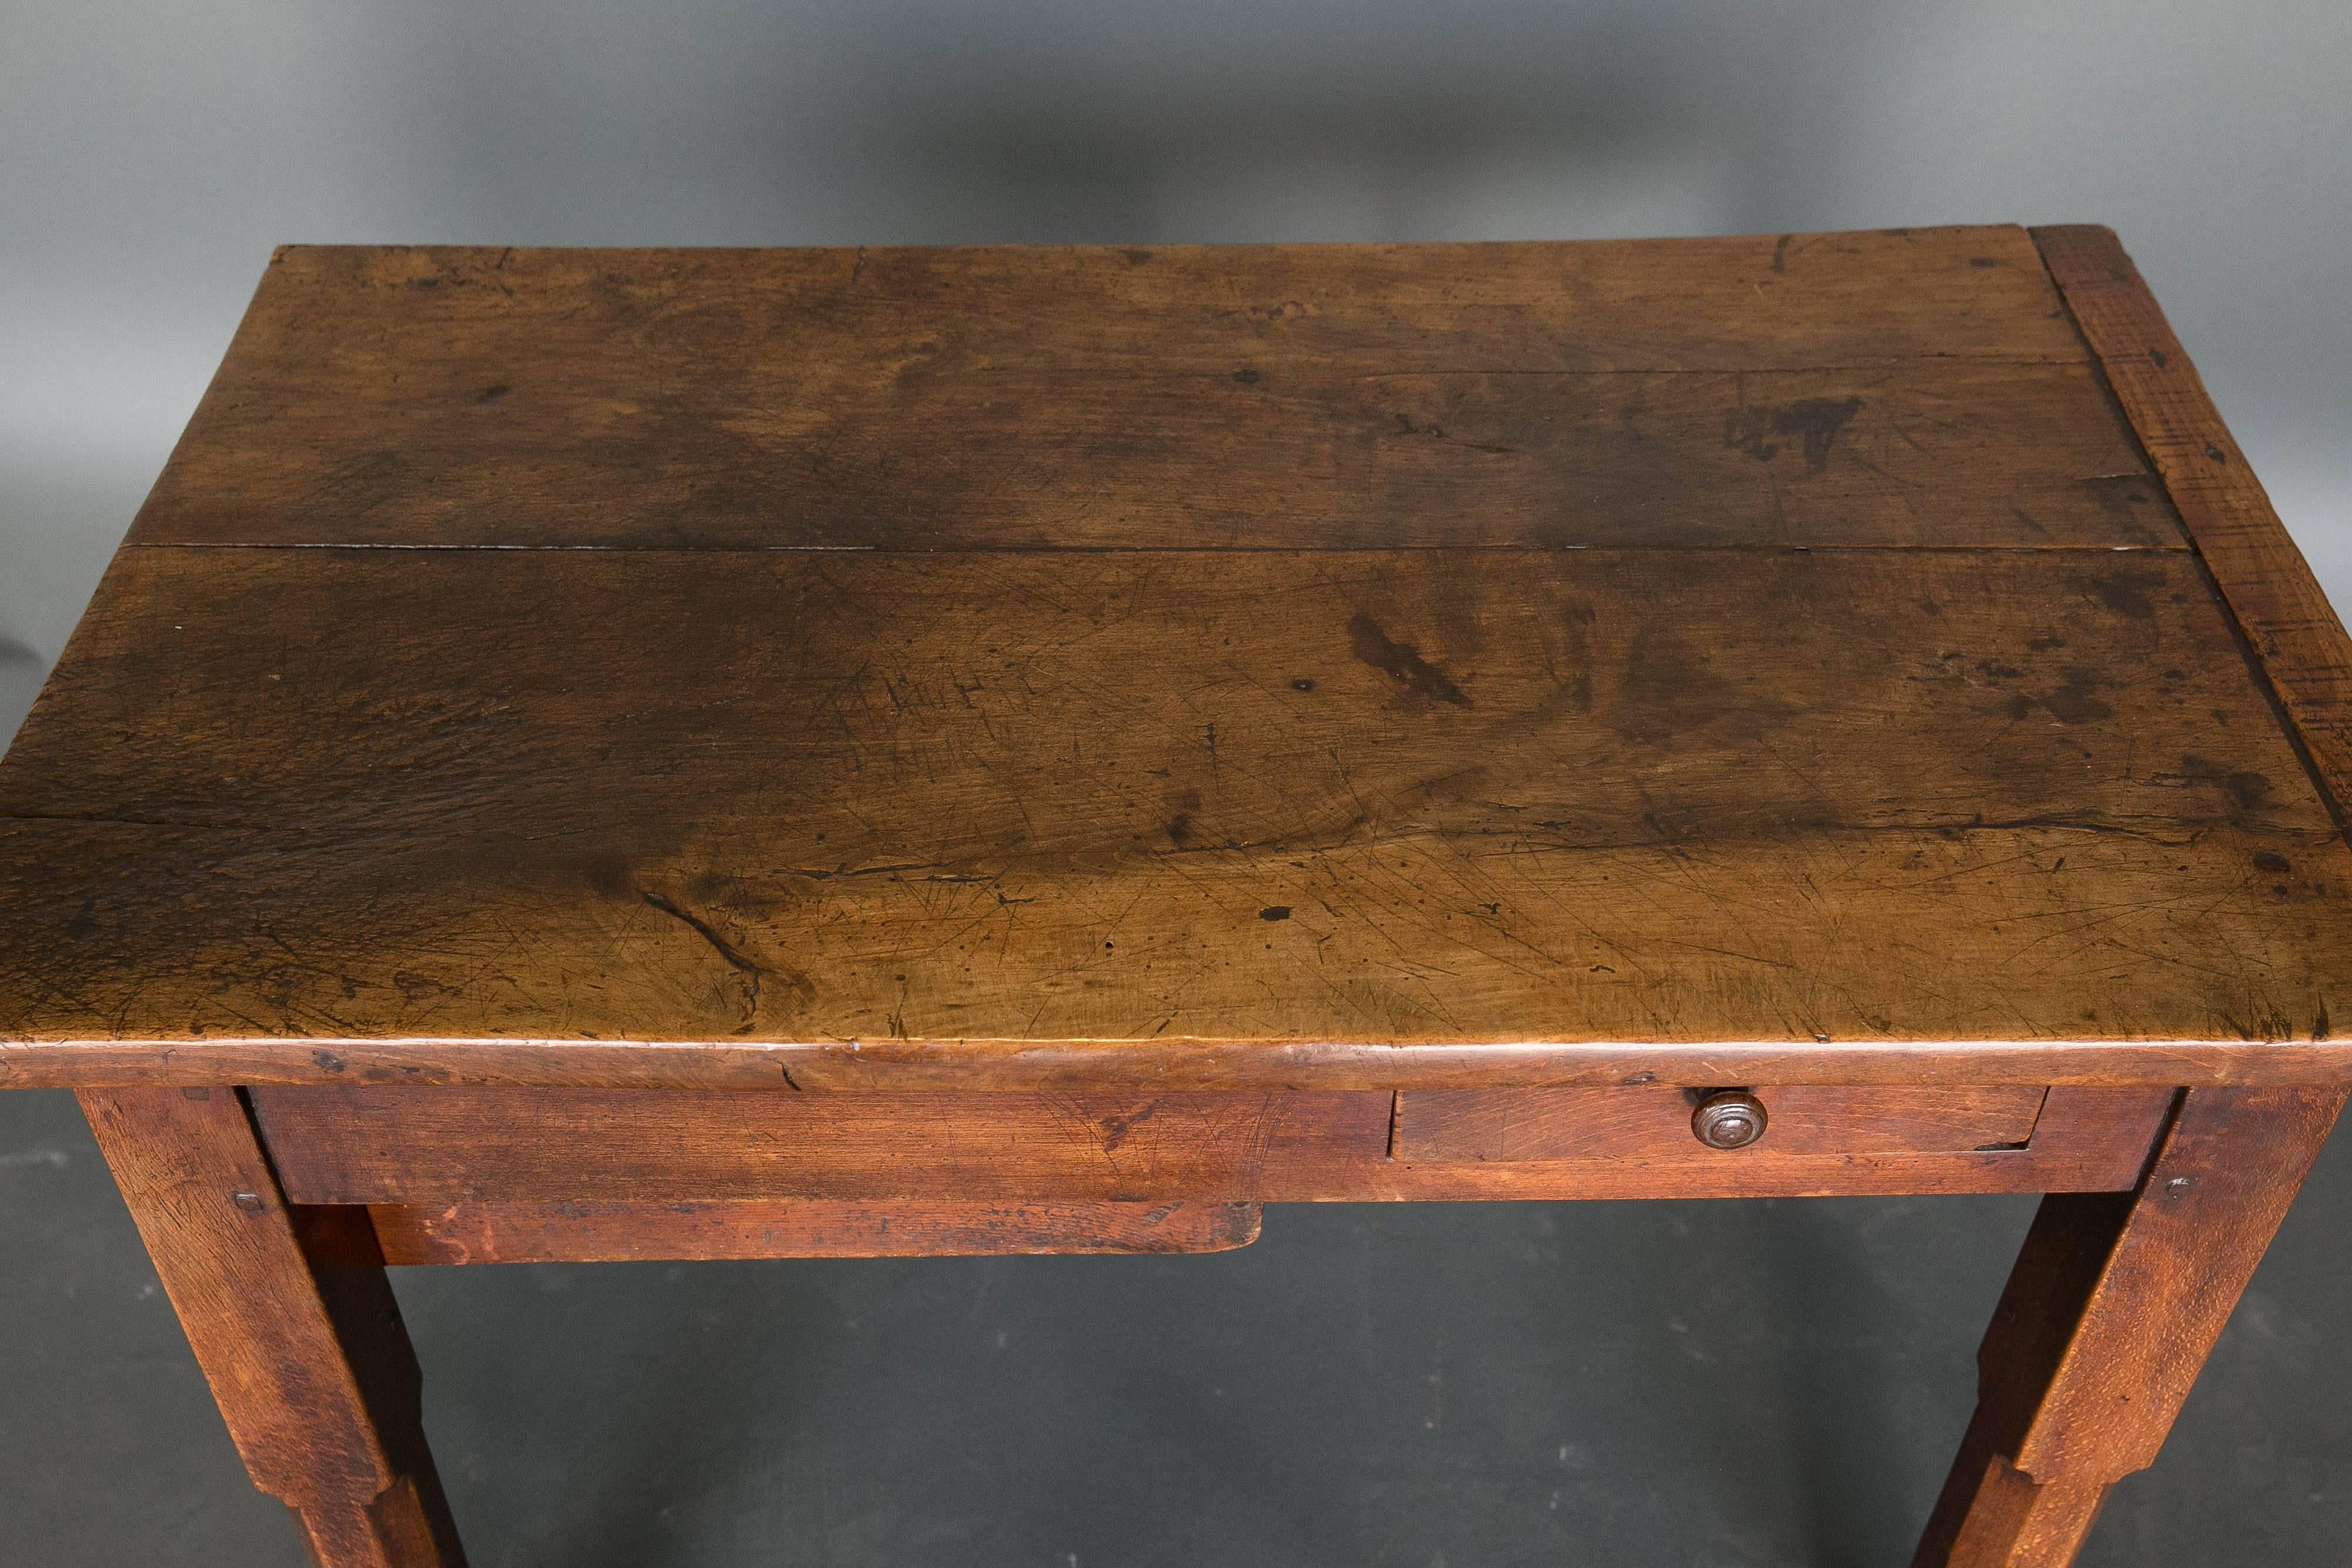 18th century French walnut work table with two drawers, one at the end and another one on one side. Great patina.